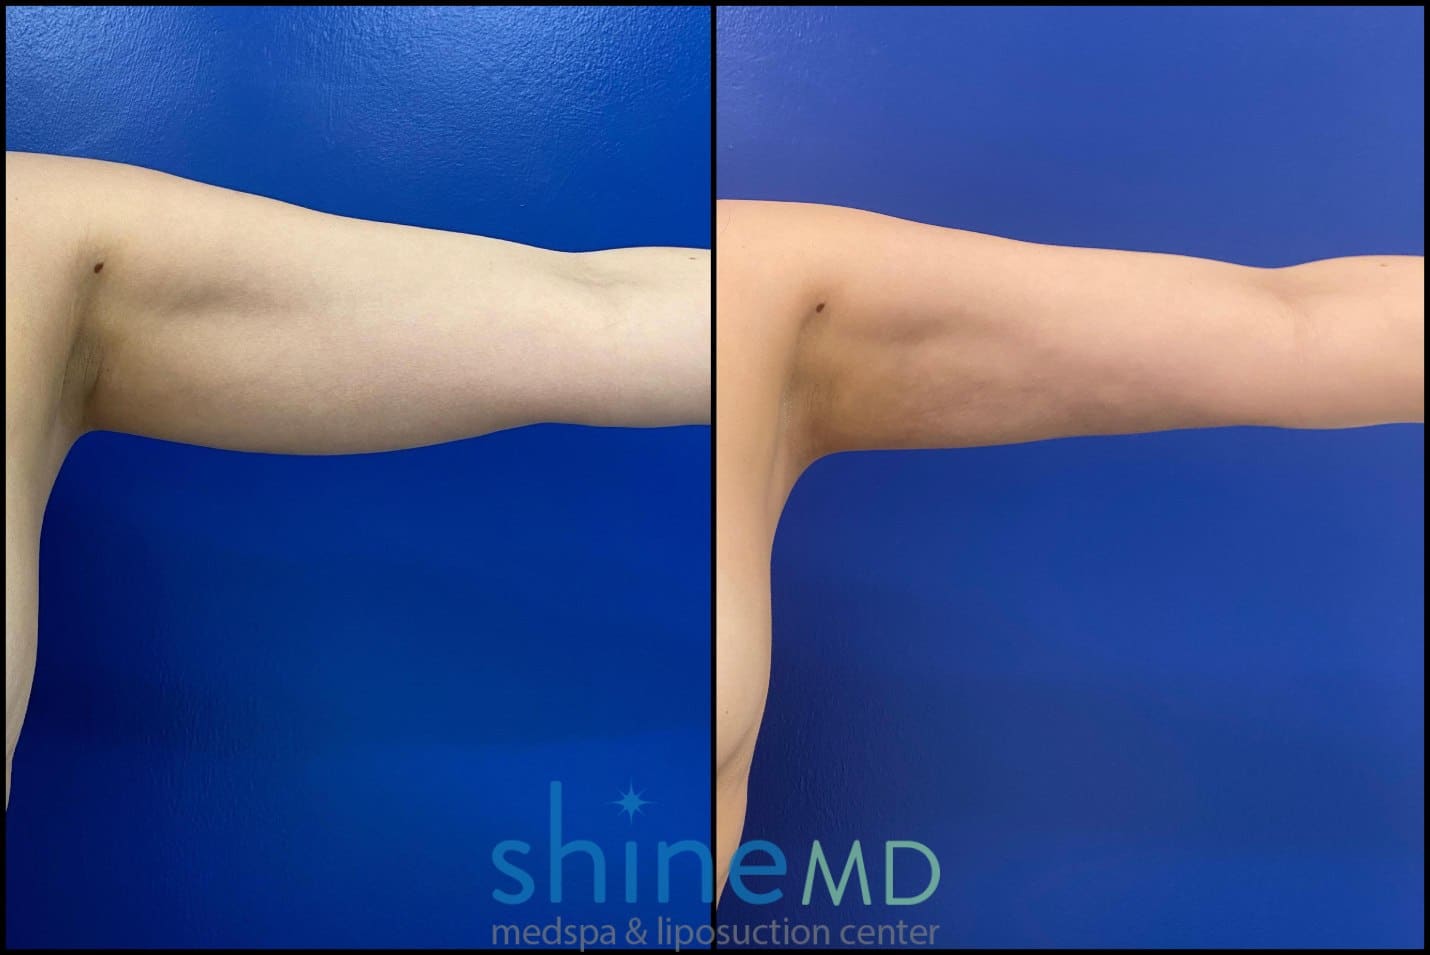 Arm Liposuction Before and After Photos